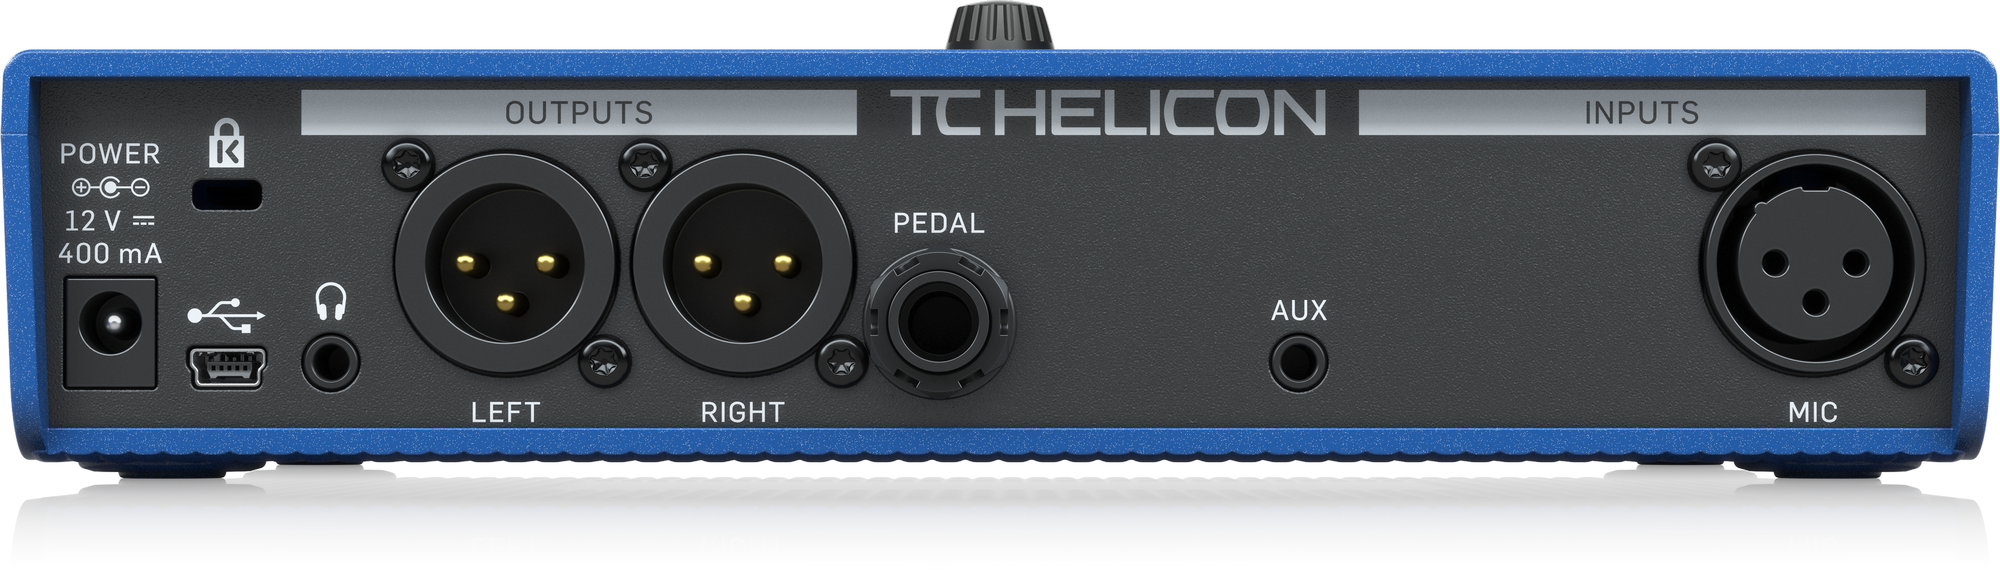 TC-Helicon VoiceLive Play Multi-Effects Vocal Processor with 1 Year Free Extended Warranty 